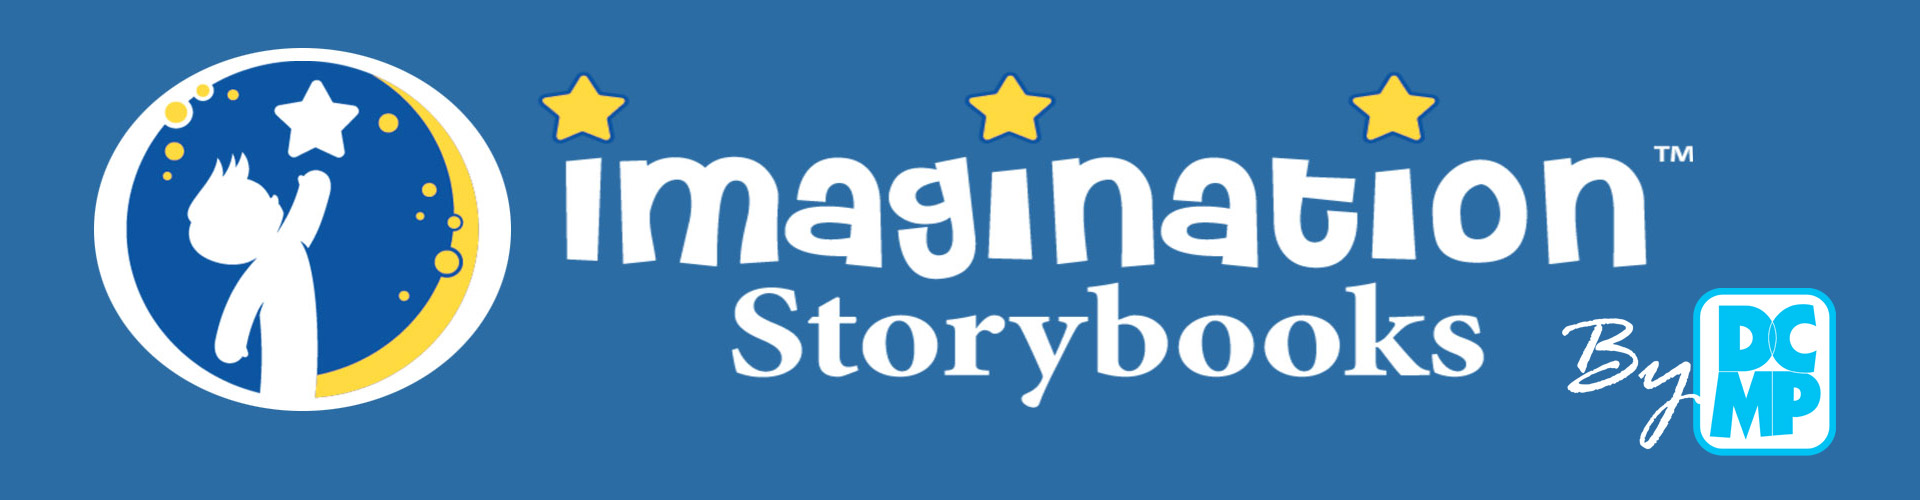 Imagination Storybooks by DCMP